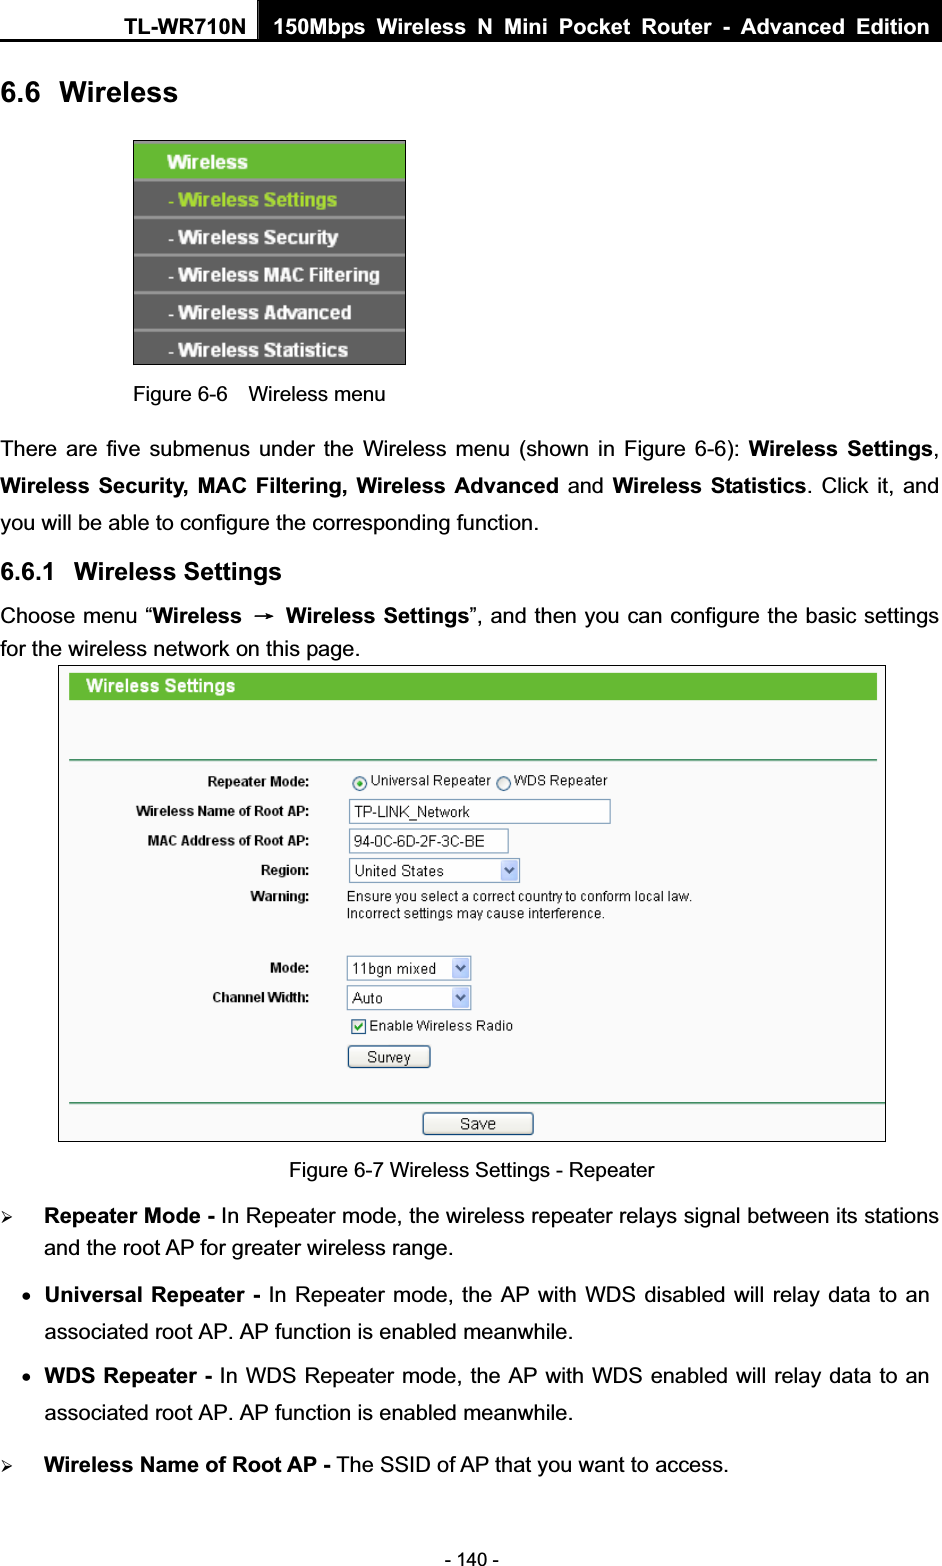 TL-WR710N  150Mbps Wireless N Mini Pocket Router - Advanced Edition- 140 - 6.6 Wireless Figure 6-6    Wireless menu There are five submenus under the Wireless menu (shown in Figure 6-6): Wireless Settings,Wireless Security, MAC Filtering, Wireless Advanced and Wireless Statistics. Click it, and you will be able to configure the corresponding function.   6.6.1 Wireless Settings Choose menu “Wireless ė Wireless Settings”, and then you can configure the basic settings for the wireless network on this page. Figure 6-7 Wireless Settings - Repeater ¾Repeater Mode - In Repeater mode, the wireless repeater relays signal between its stations and the root AP for greater wireless range.xUniversal Repeater - In Repeater mode, the AP with WDS disabled will relay data to an associated root AP. AP function is enabled meanwhile.xWDS Repeater - In WDS Repeater mode, the AP with WDS enabled will relay data to an associated root AP. AP function is enabled meanwhile.¾Wireless Name of Root AP - The SSID of AP that you want to access.